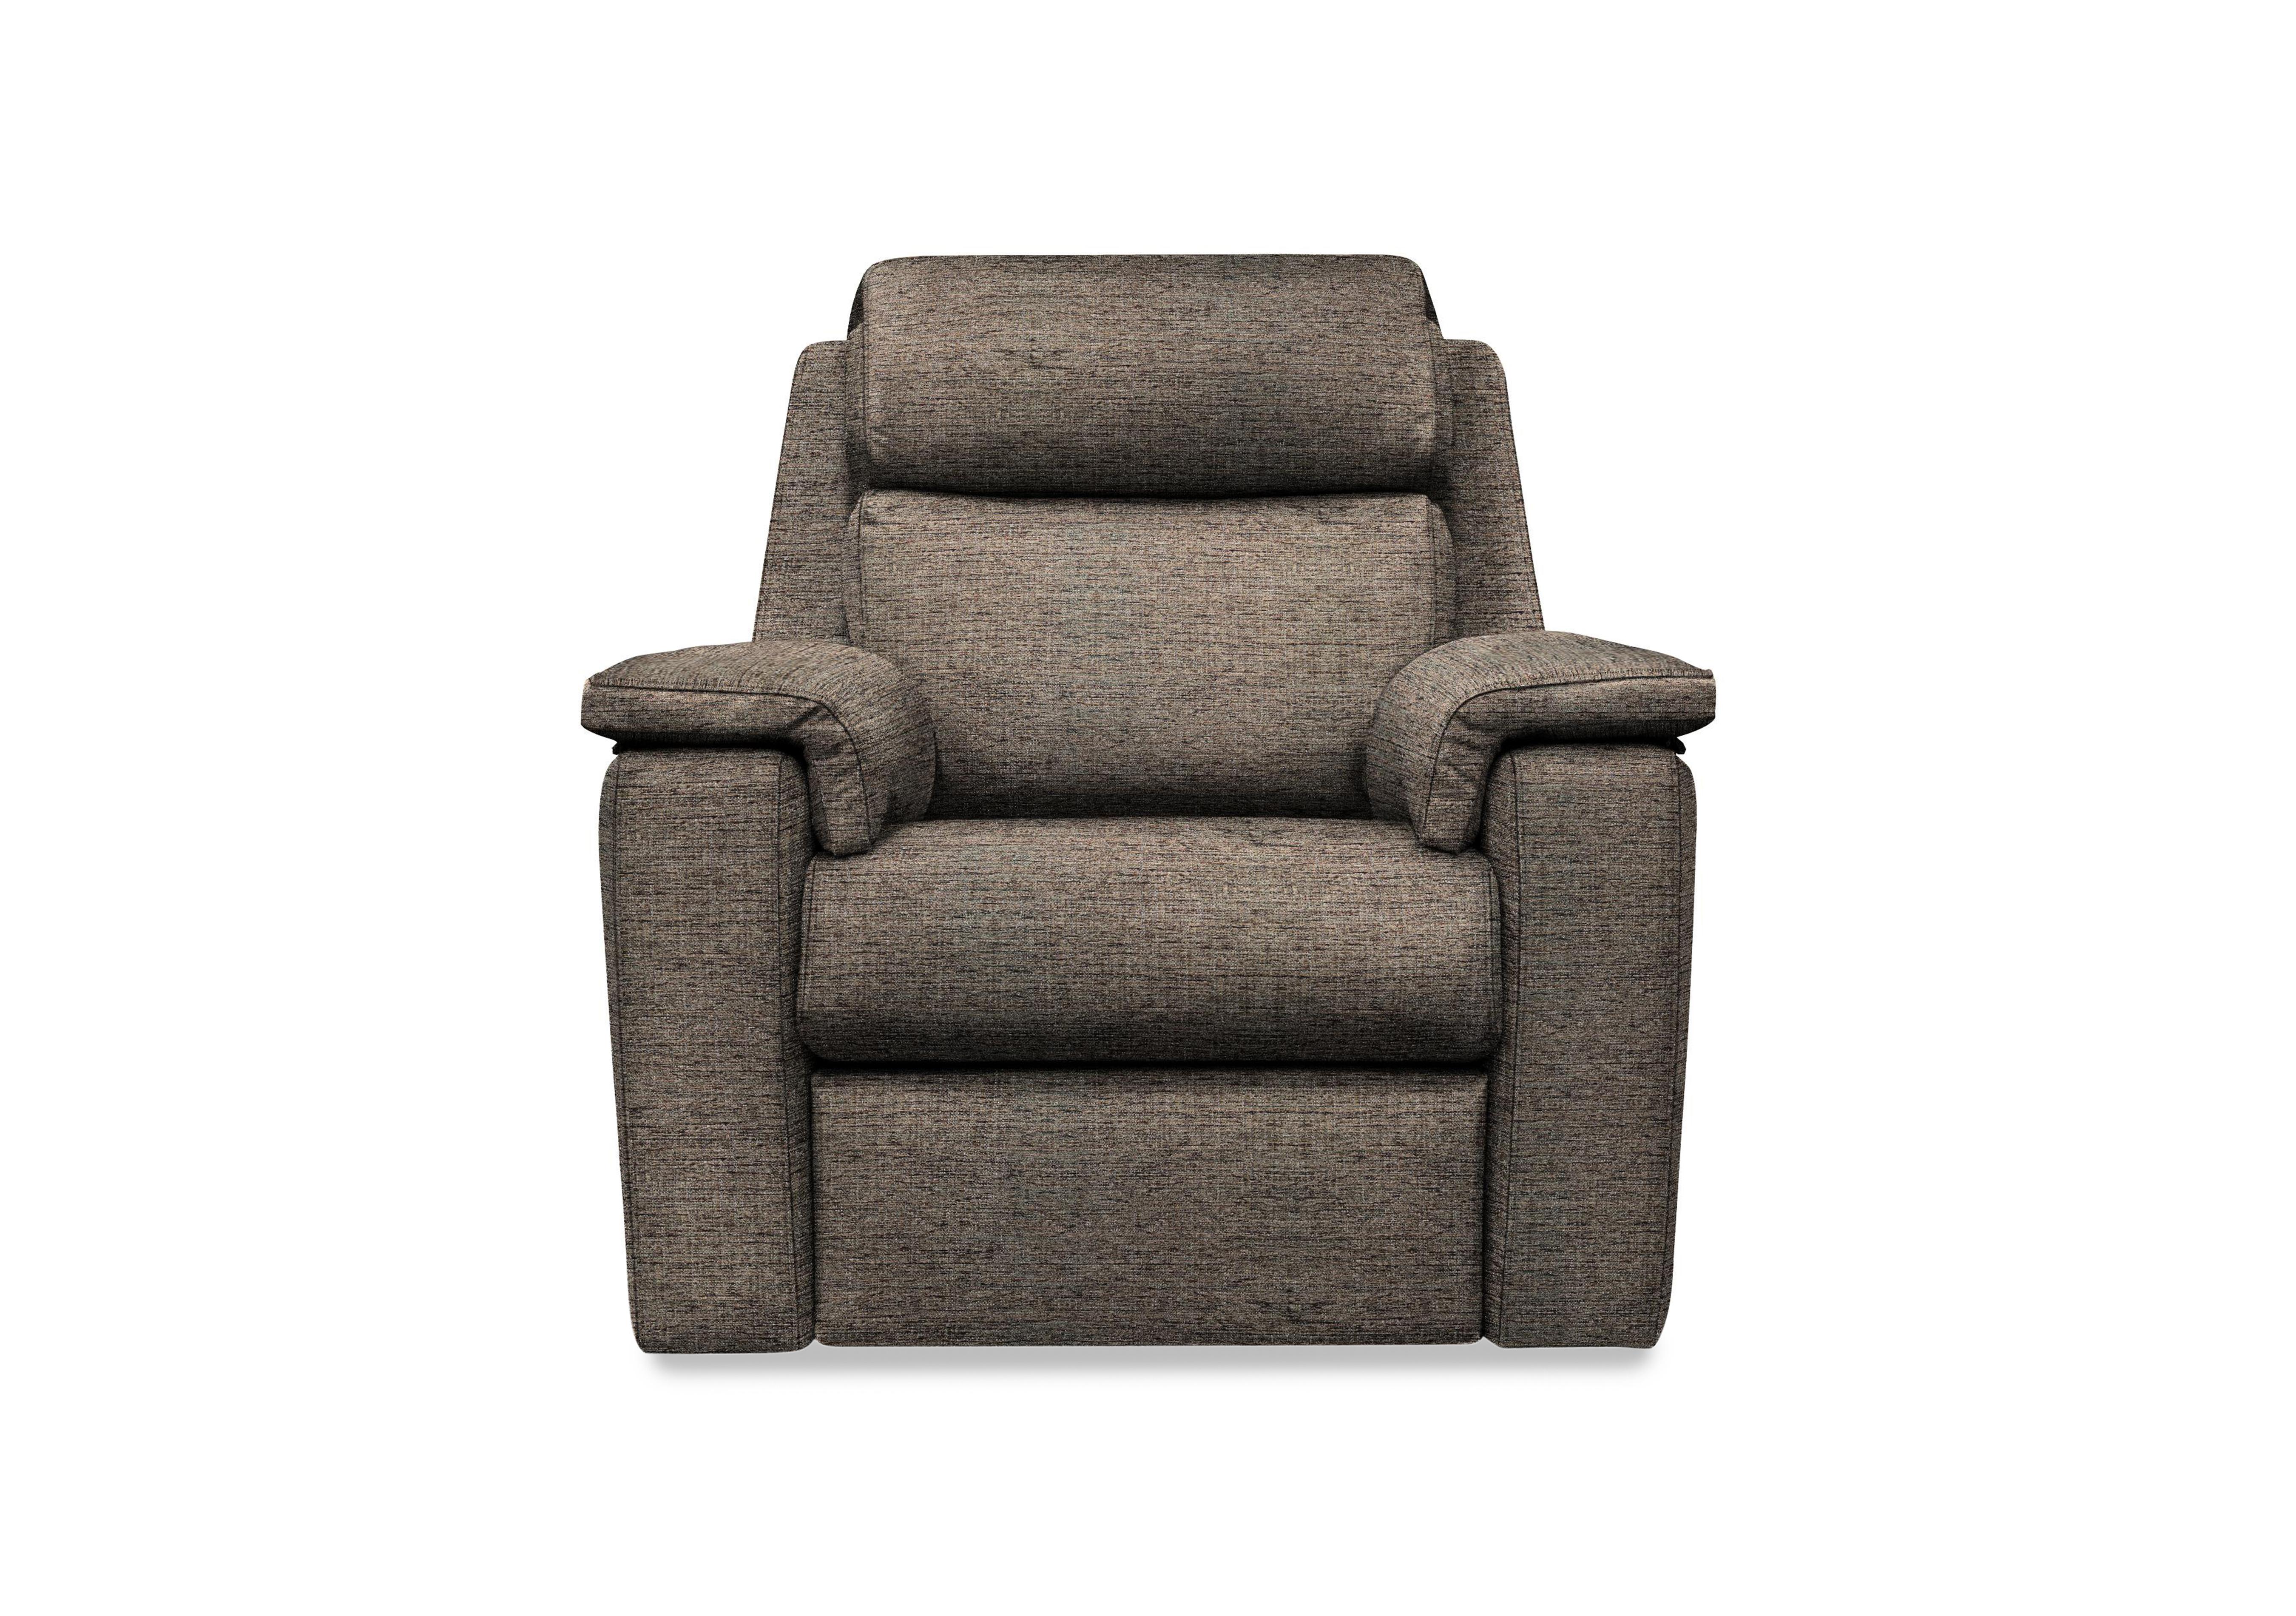 Thornbury Fabric Power Recliner Chair with Power Headrest and Power Lumbar in A008 Yarn Slate on Furniture Village